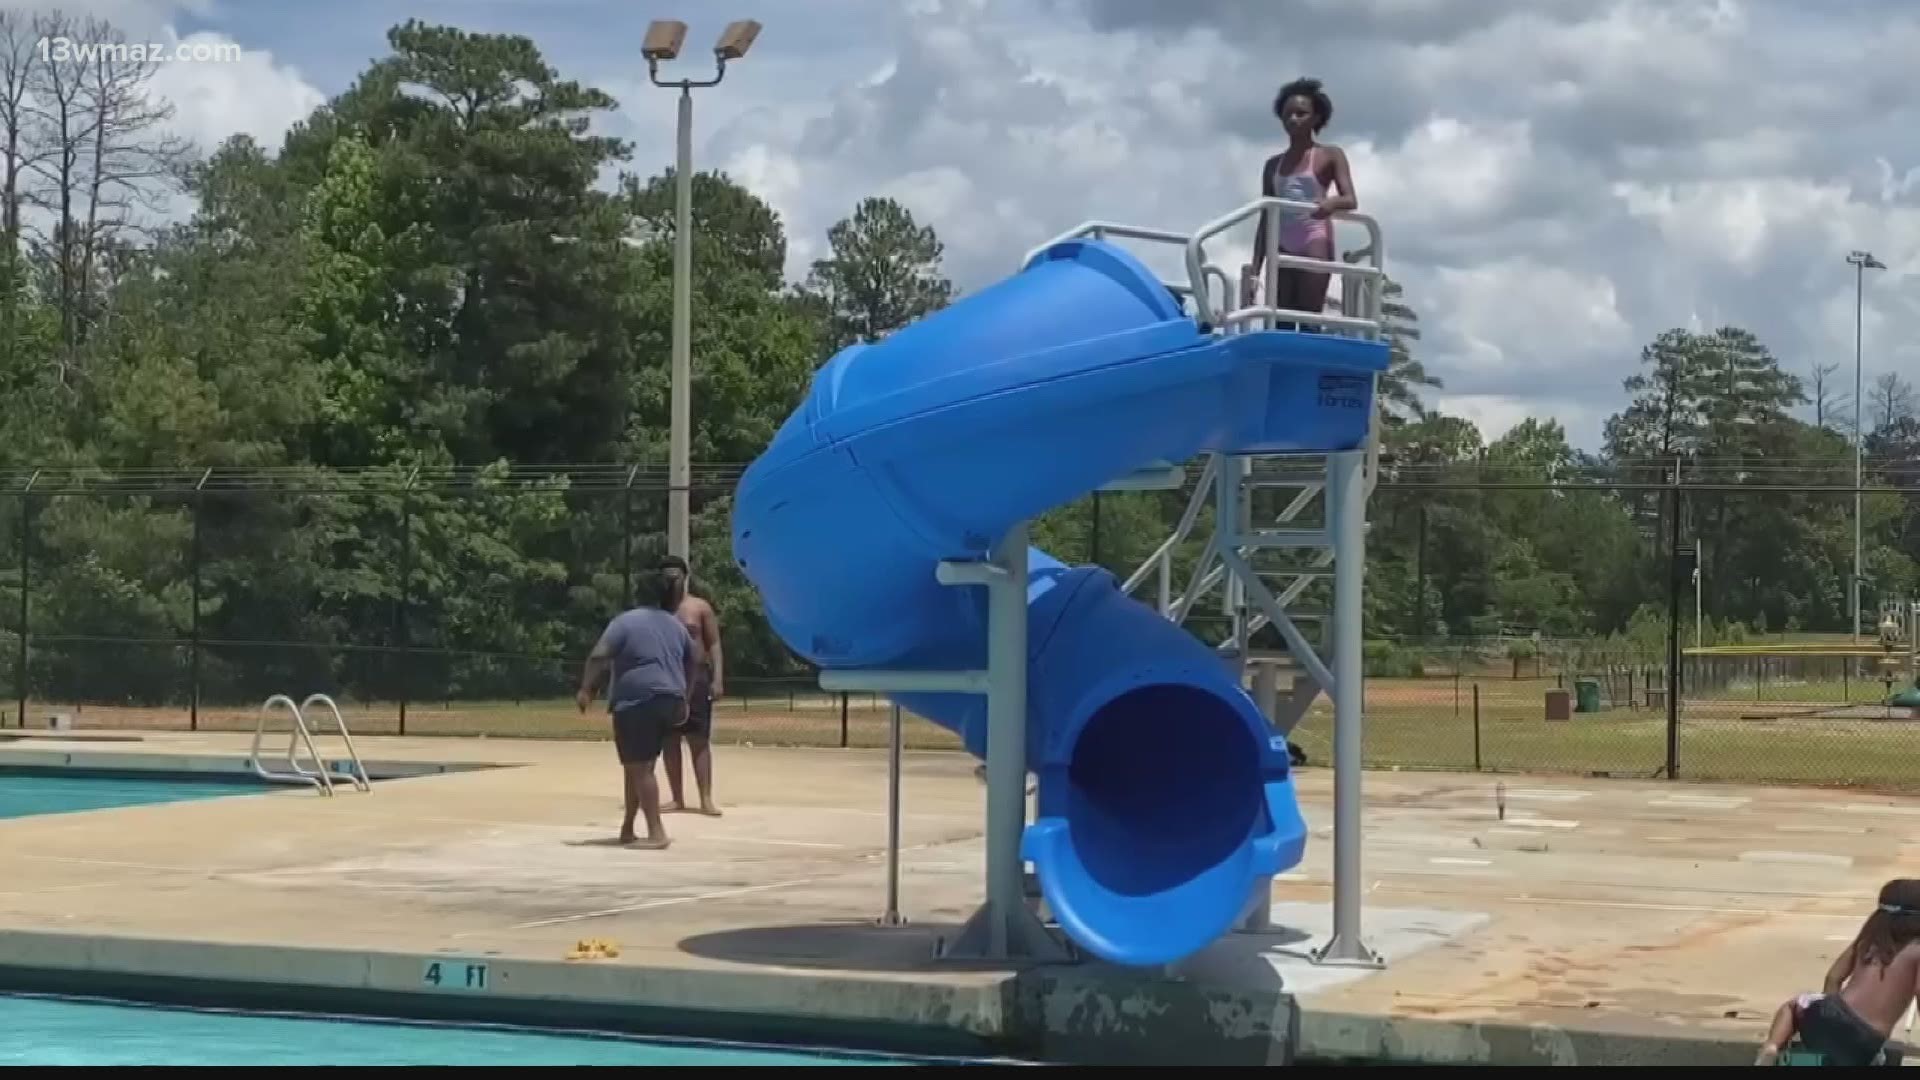 Only two pools opened Saturday in Macon, because of a staffing shortage.